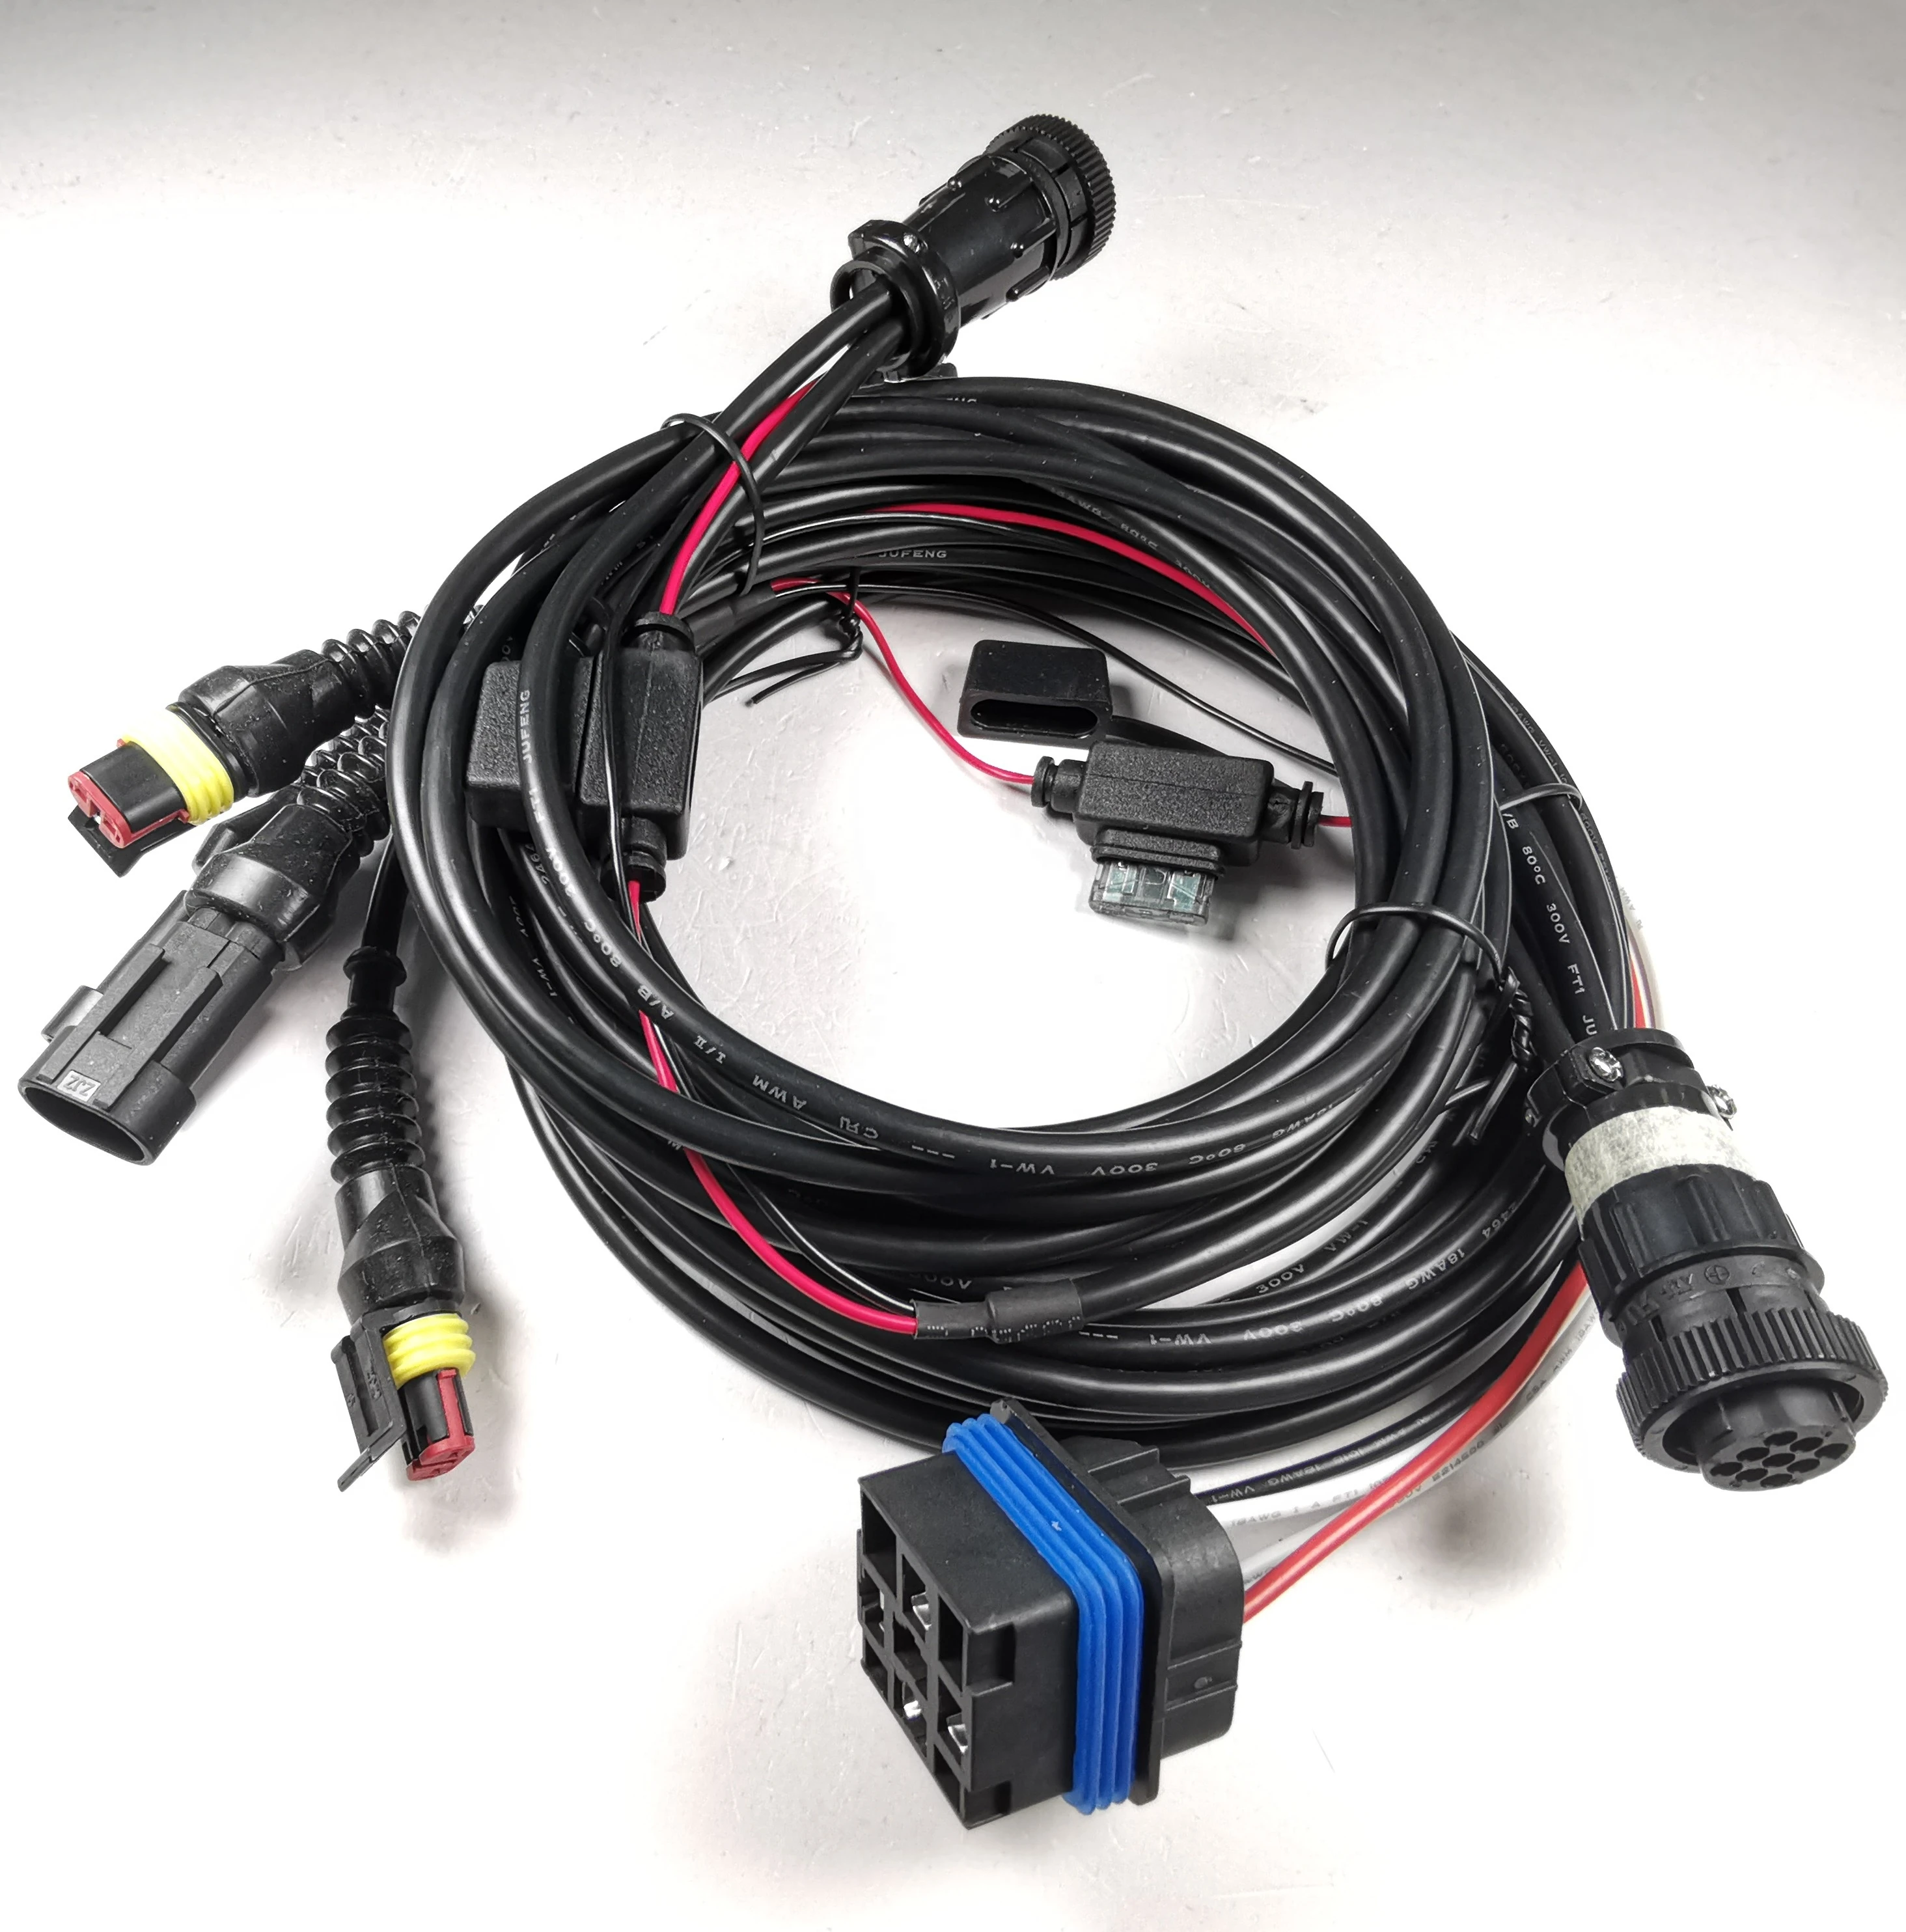 70 amp Power Relay Wire Harness Relay Wiring Harness ignitionl wiring harness with IATF16949